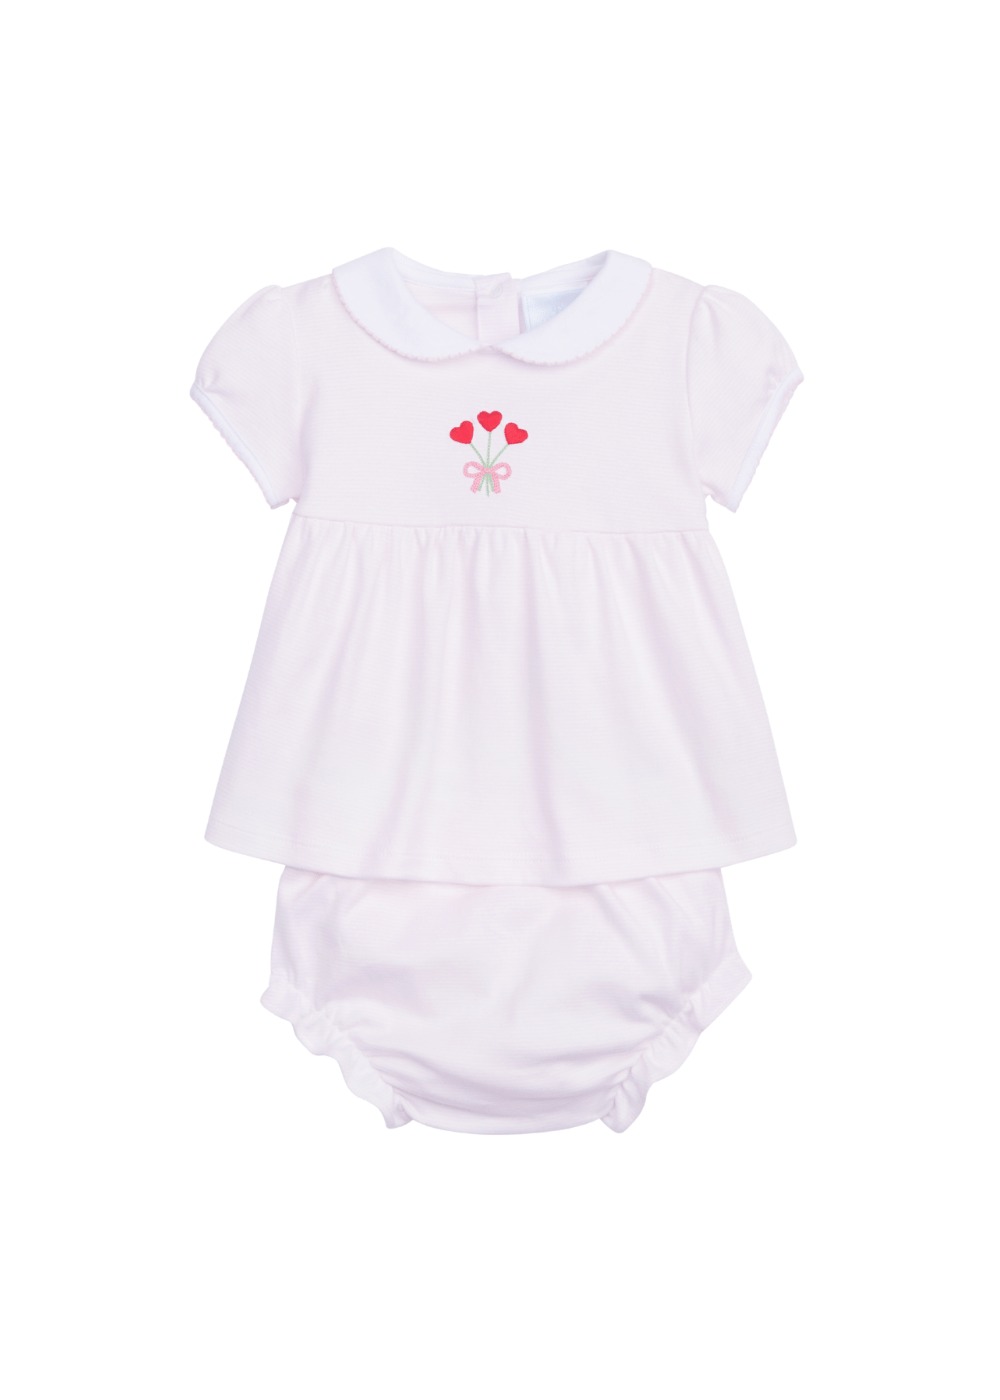 seguridadindustrialcr classic children's clothing, baby girl's light pink diaper set with embroidered hearts on chest